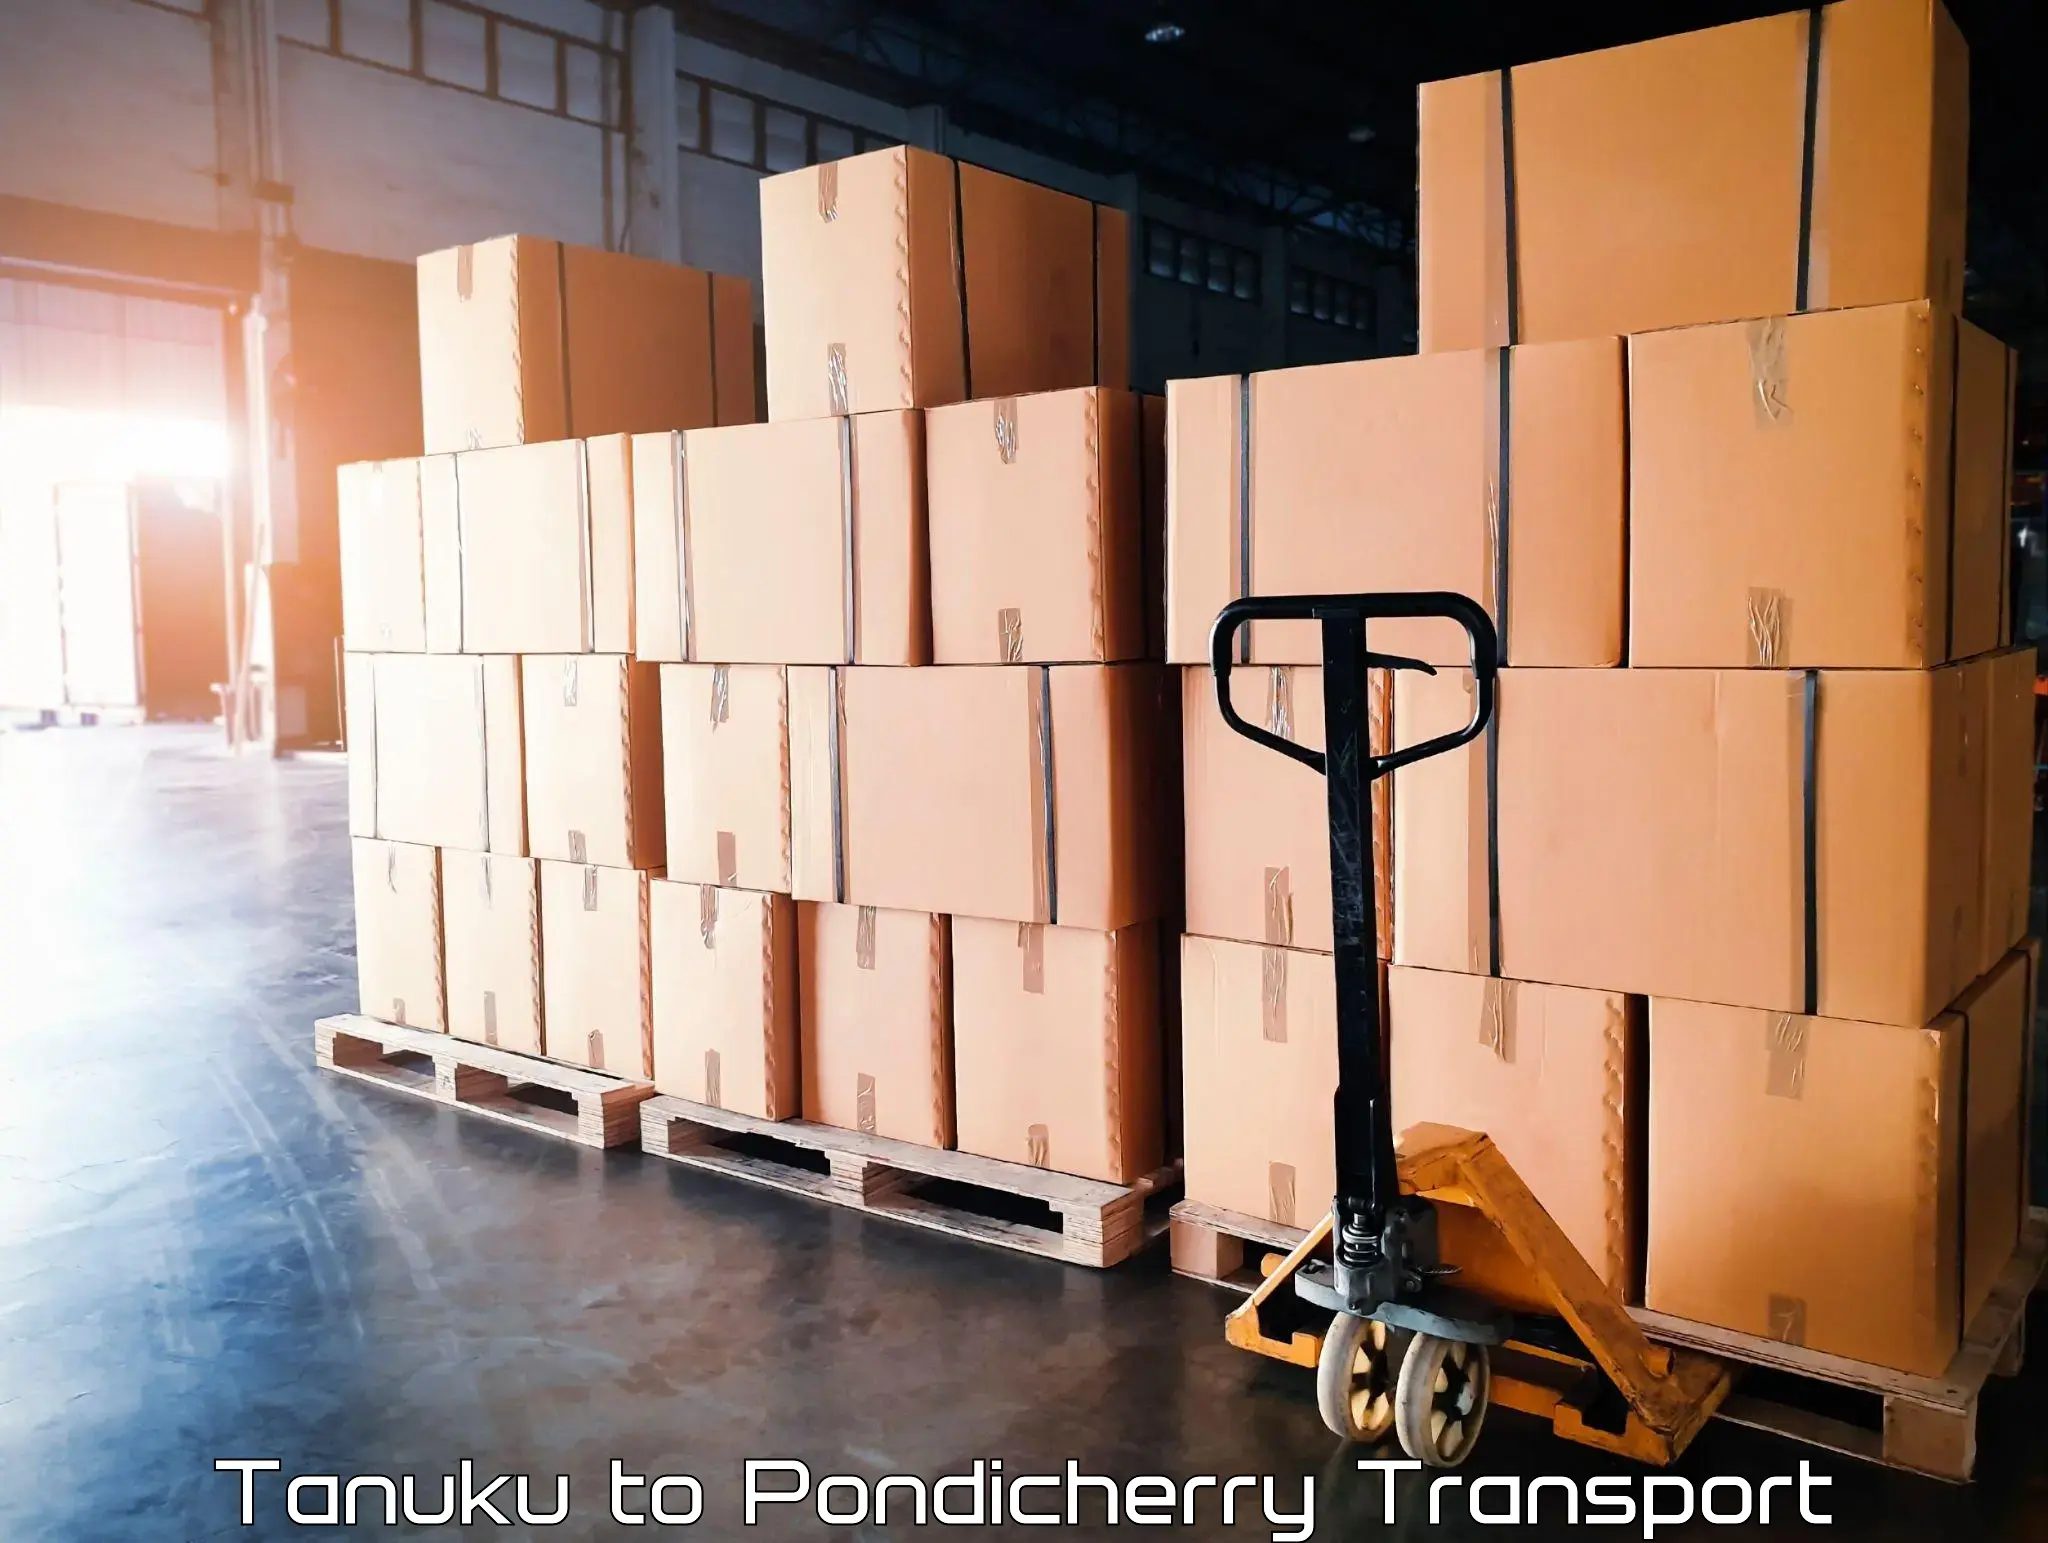 Transport bike from one state to another Tanuku to Pondicherry